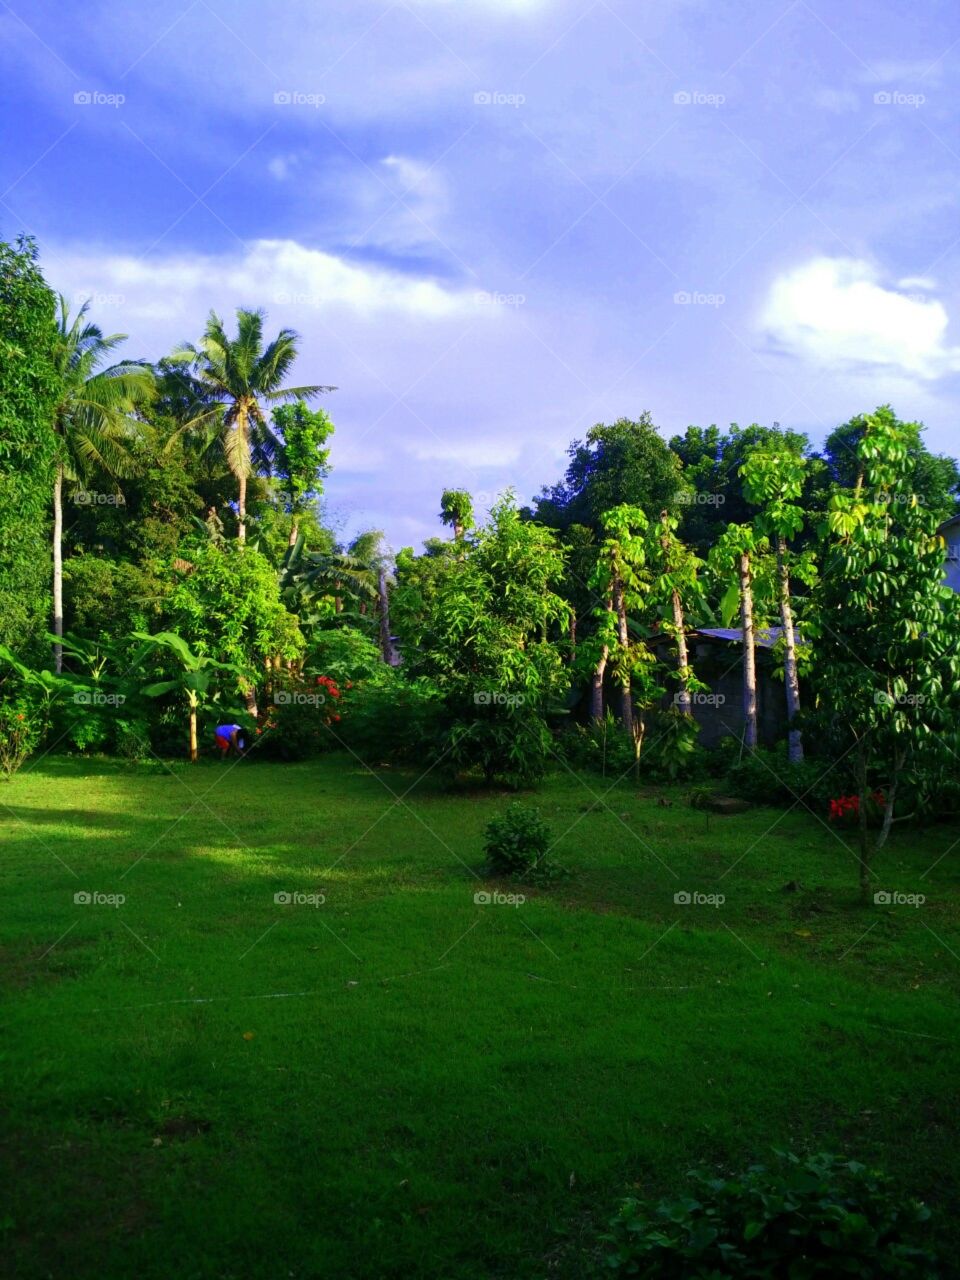 peaceful and greeny place